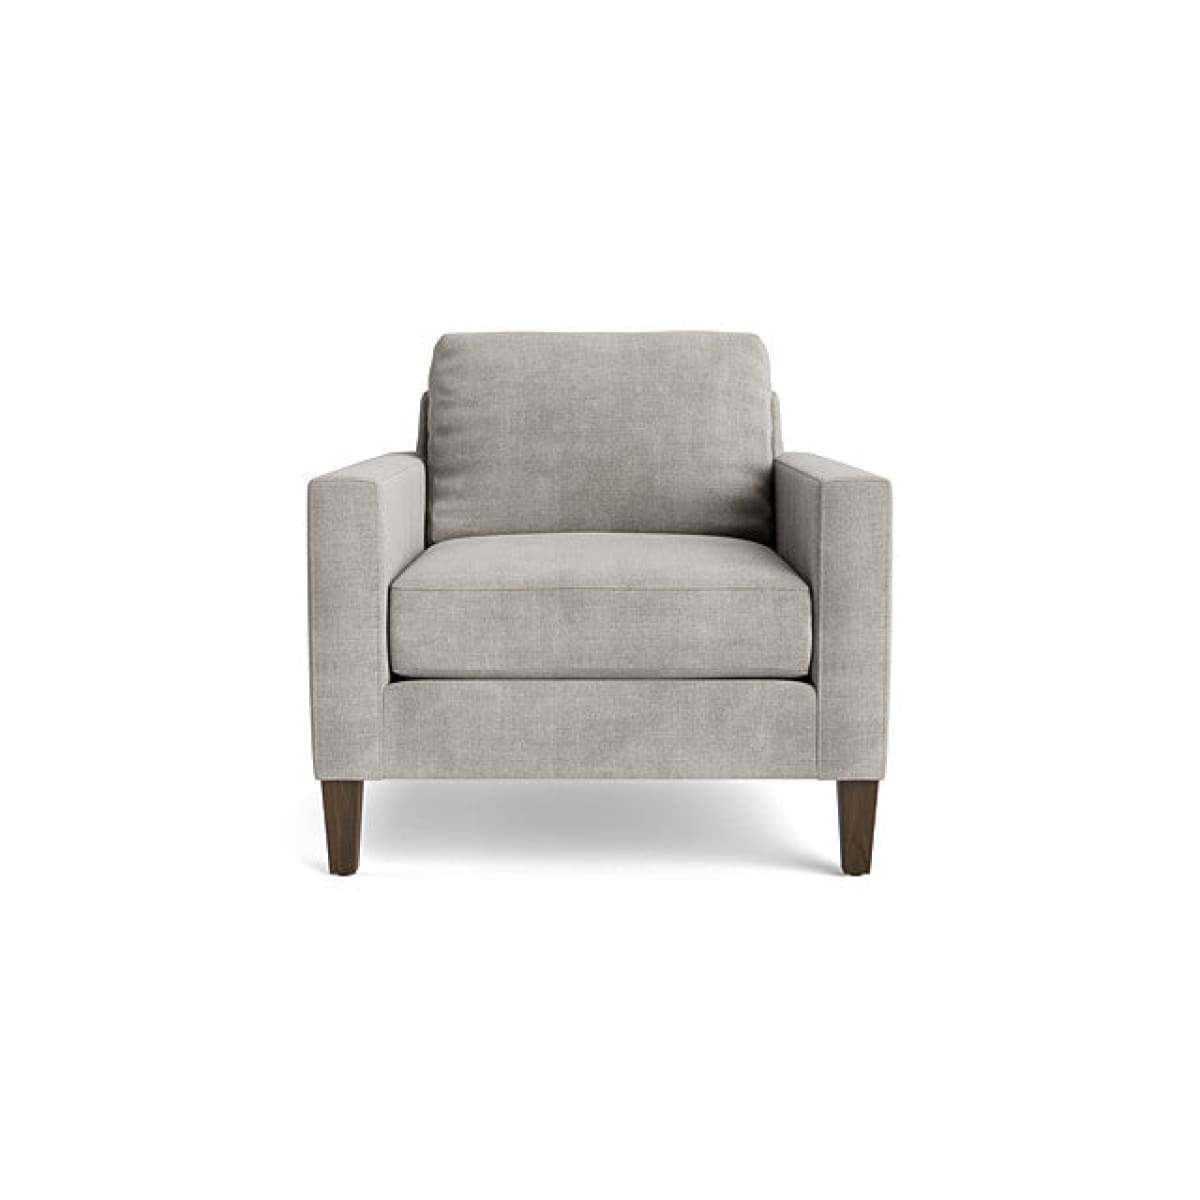 Kent Accent Chair - Analogy Gray